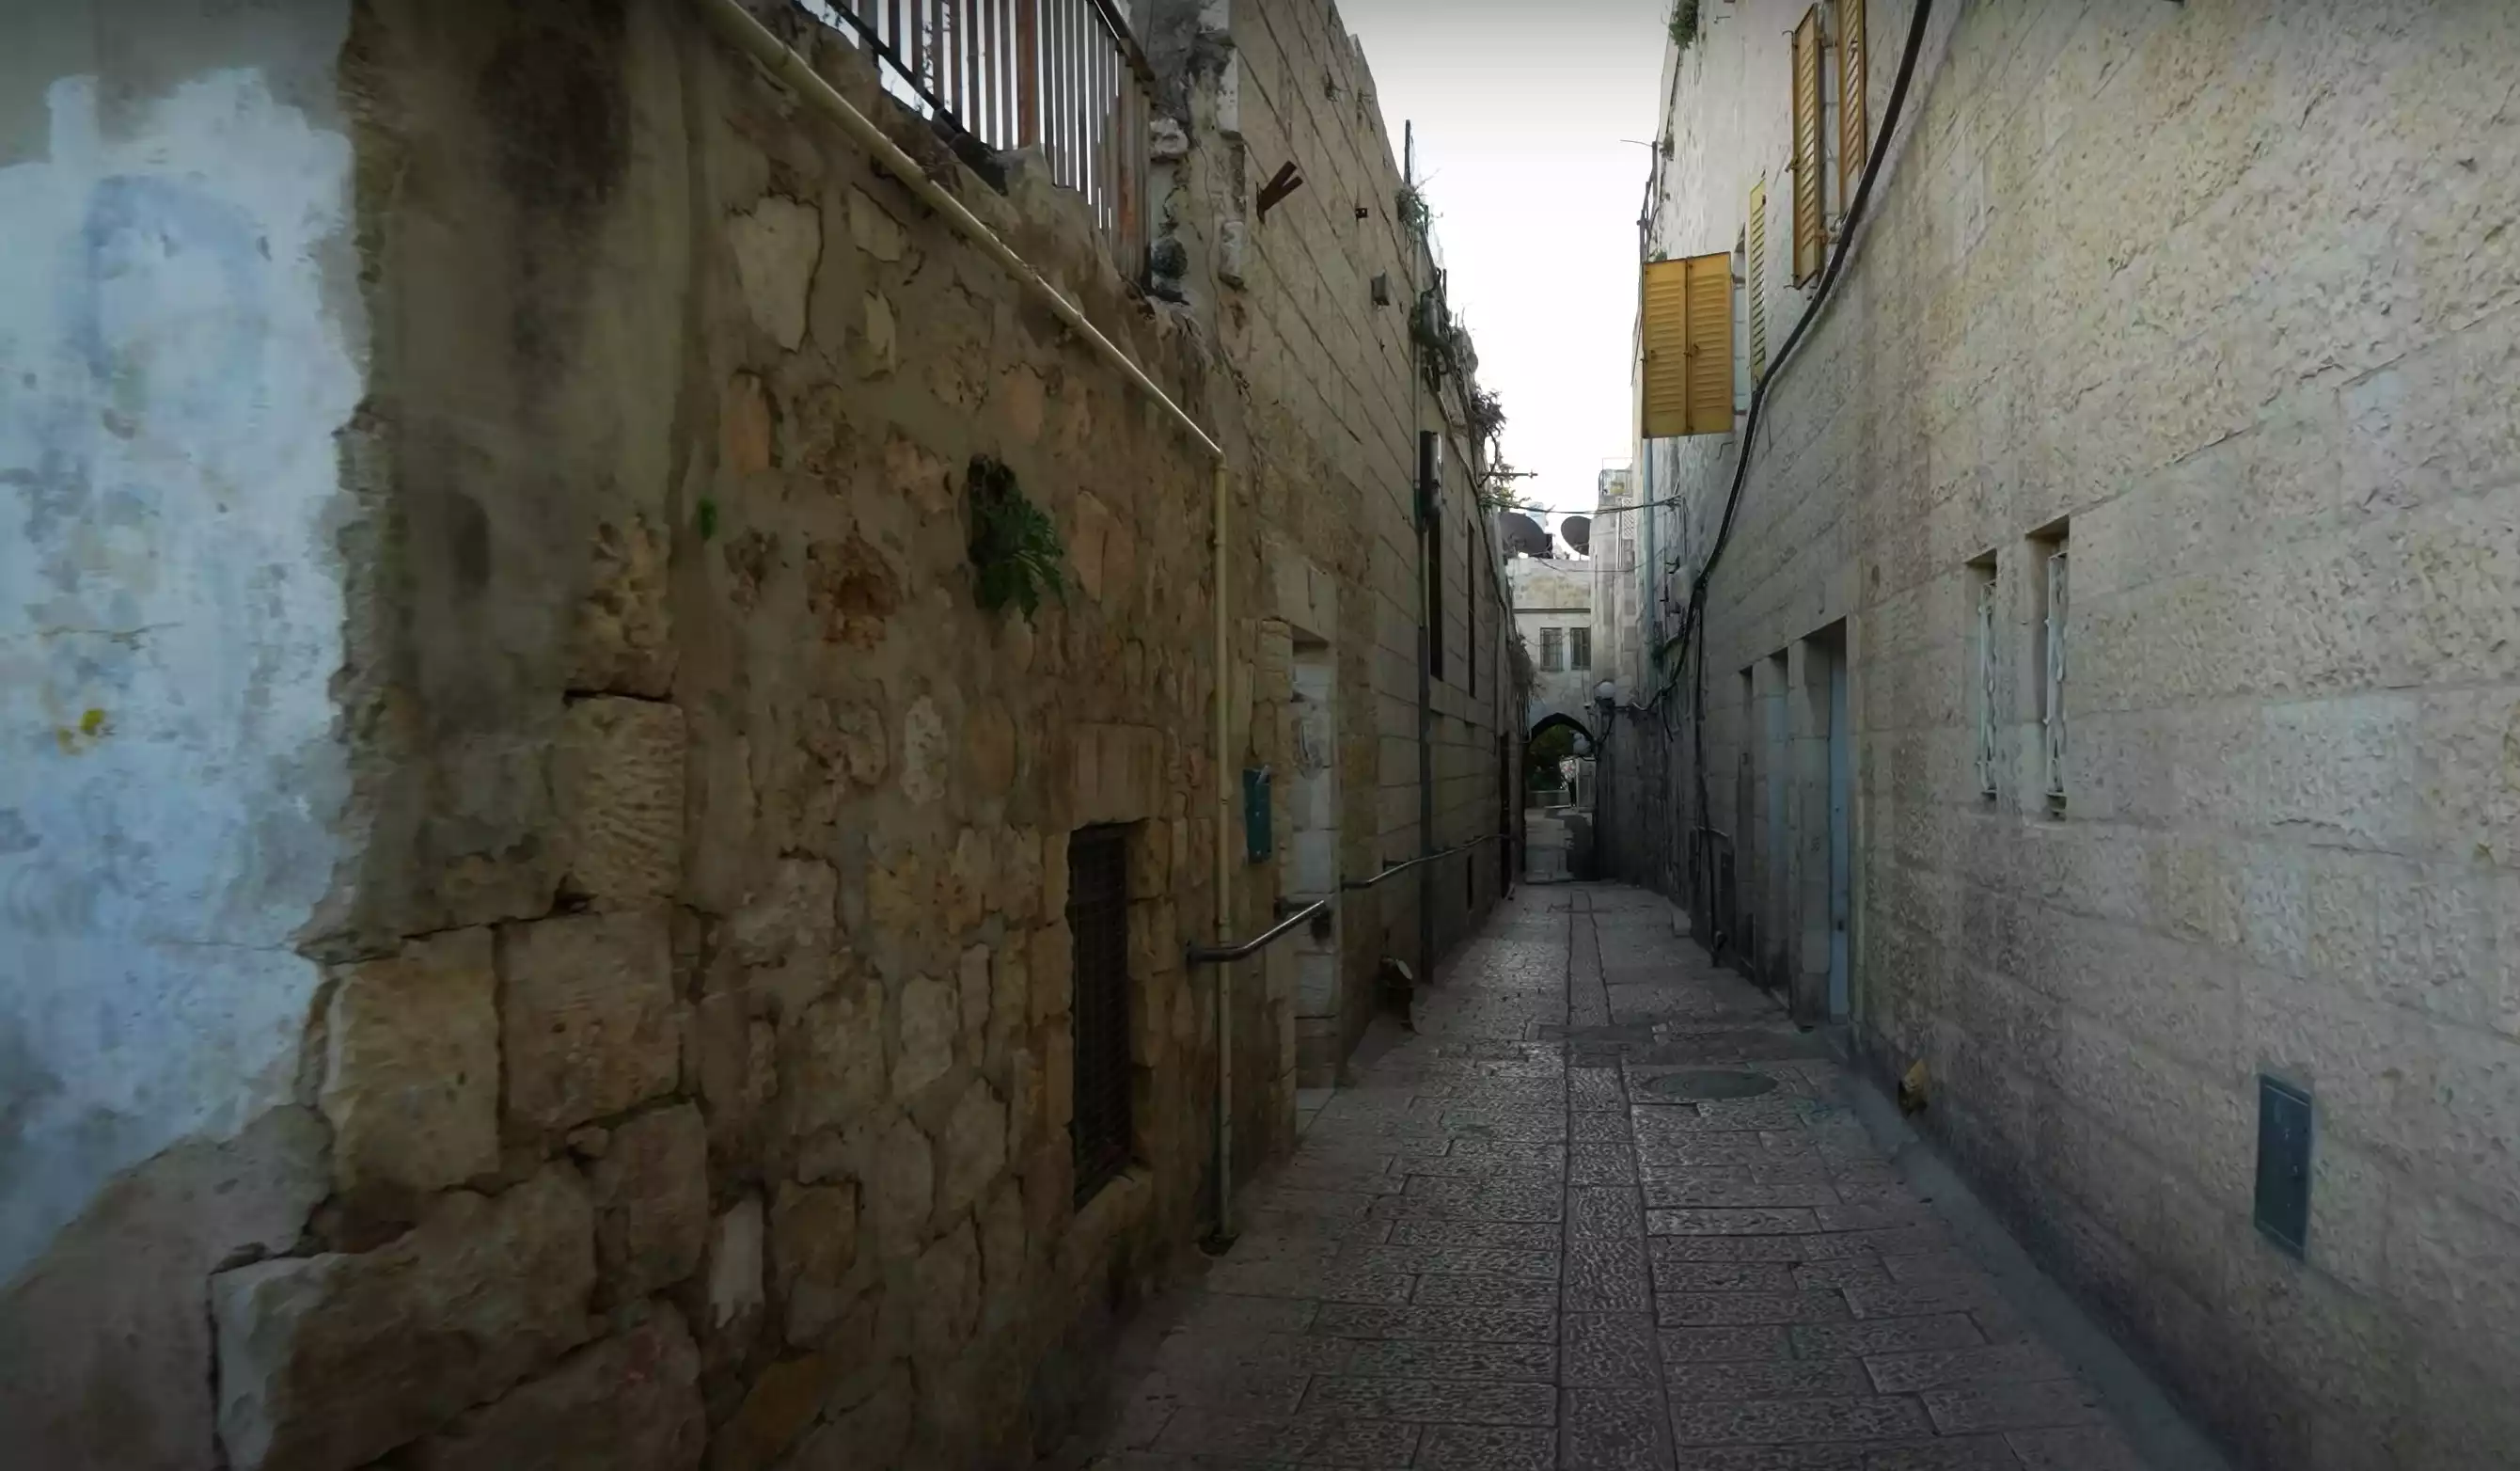 Jerusalem's-Old-City-winding-streets-and-timeless-structures